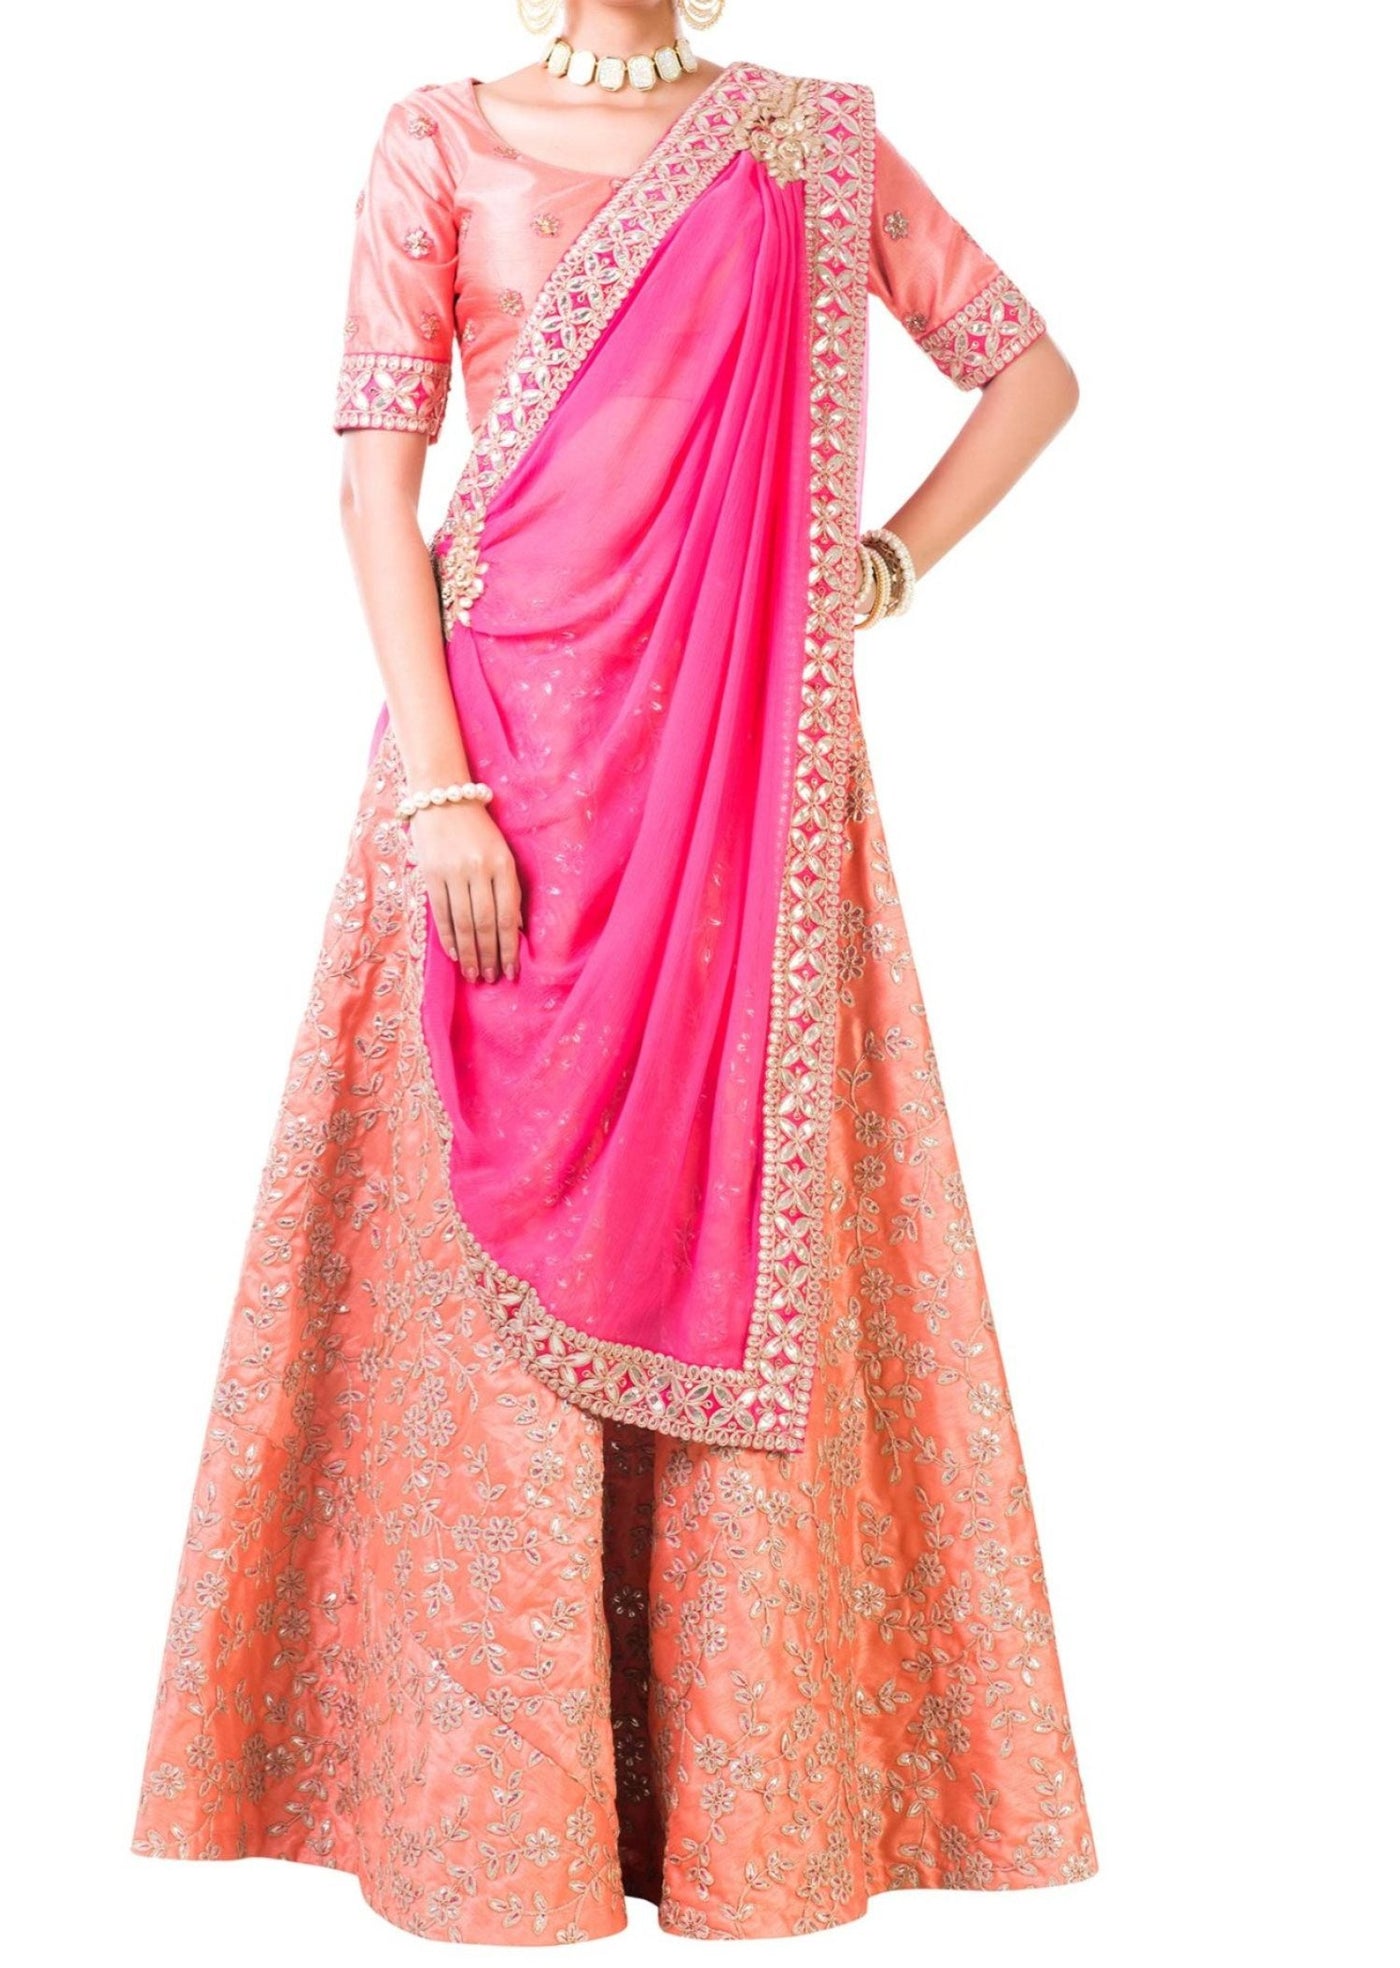 Peach Work Lehenga - Indian Clothing in Denver, CO, Aurora, CO, Boulder, CO, Fort Collins, CO, Colorado Springs, CO, Parker, CO, Highlands Ranch, CO, Cherry Creek, CO, Centennial, CO, and Longmont, CO. Nationwide shipping USA - India Fashion X